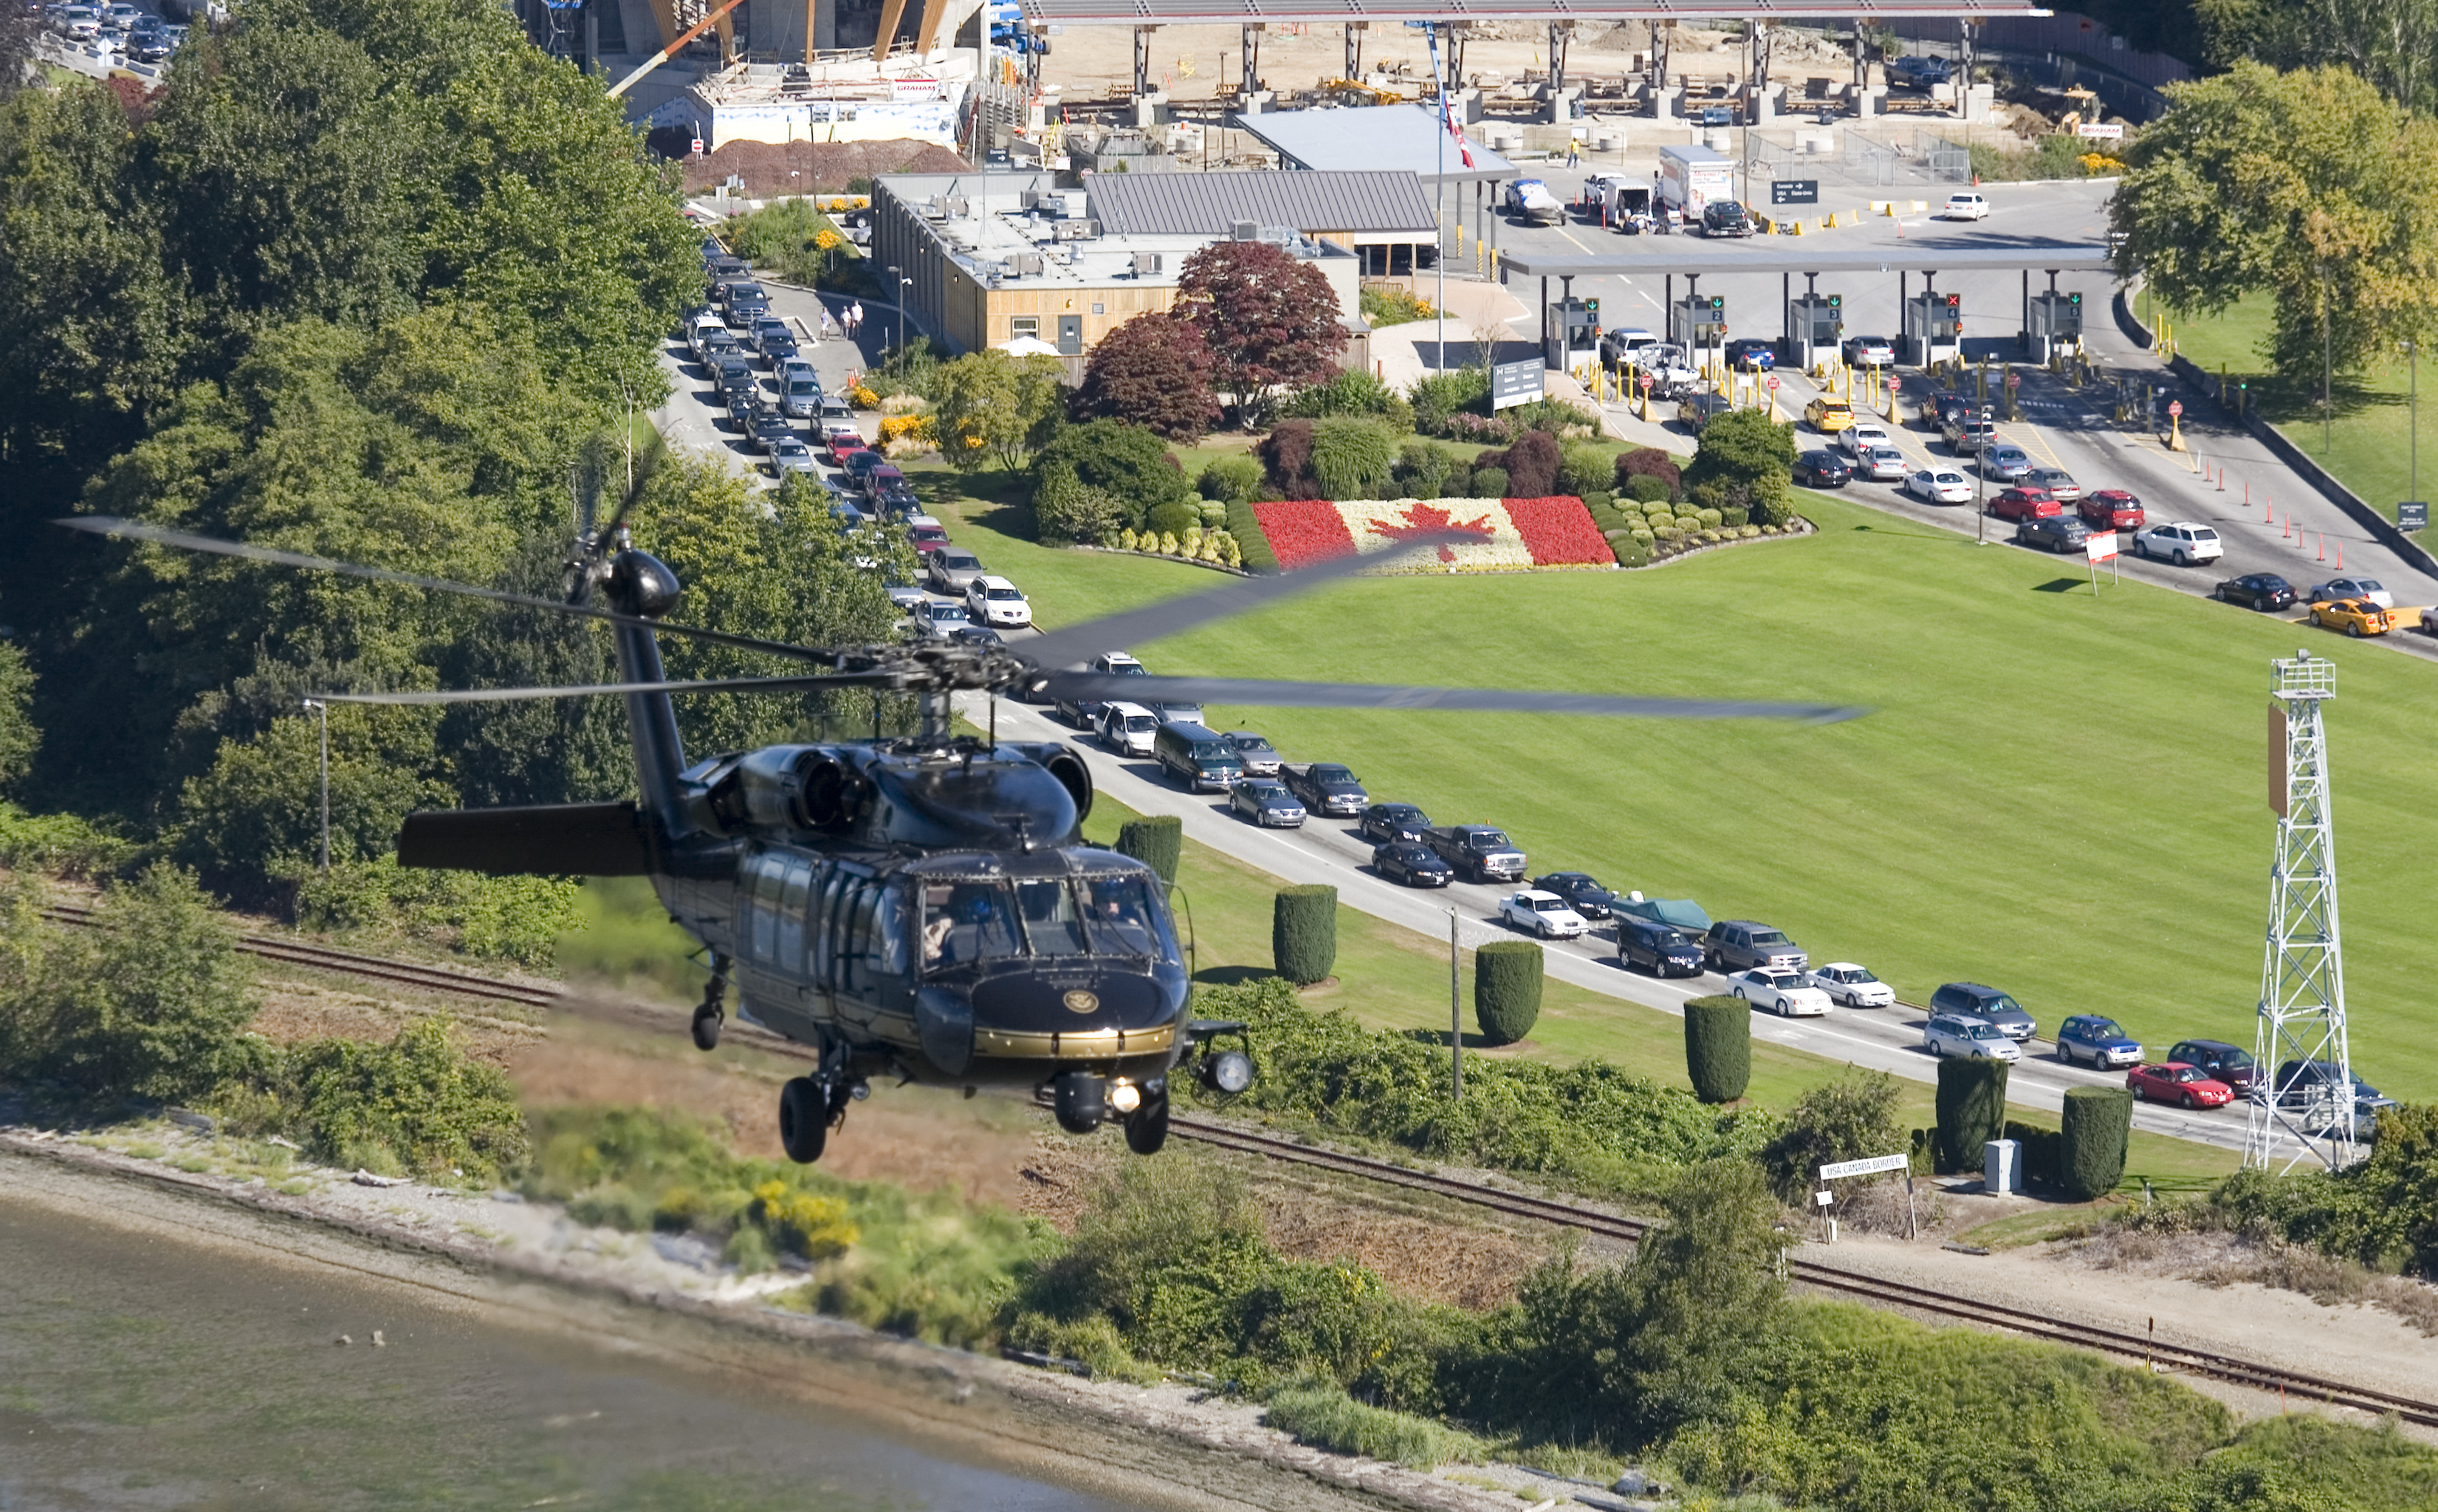 An Air and Marine Operations UH-60 crew from the Bellingham Air and Marine Branch flies near the U.S./Canada border.